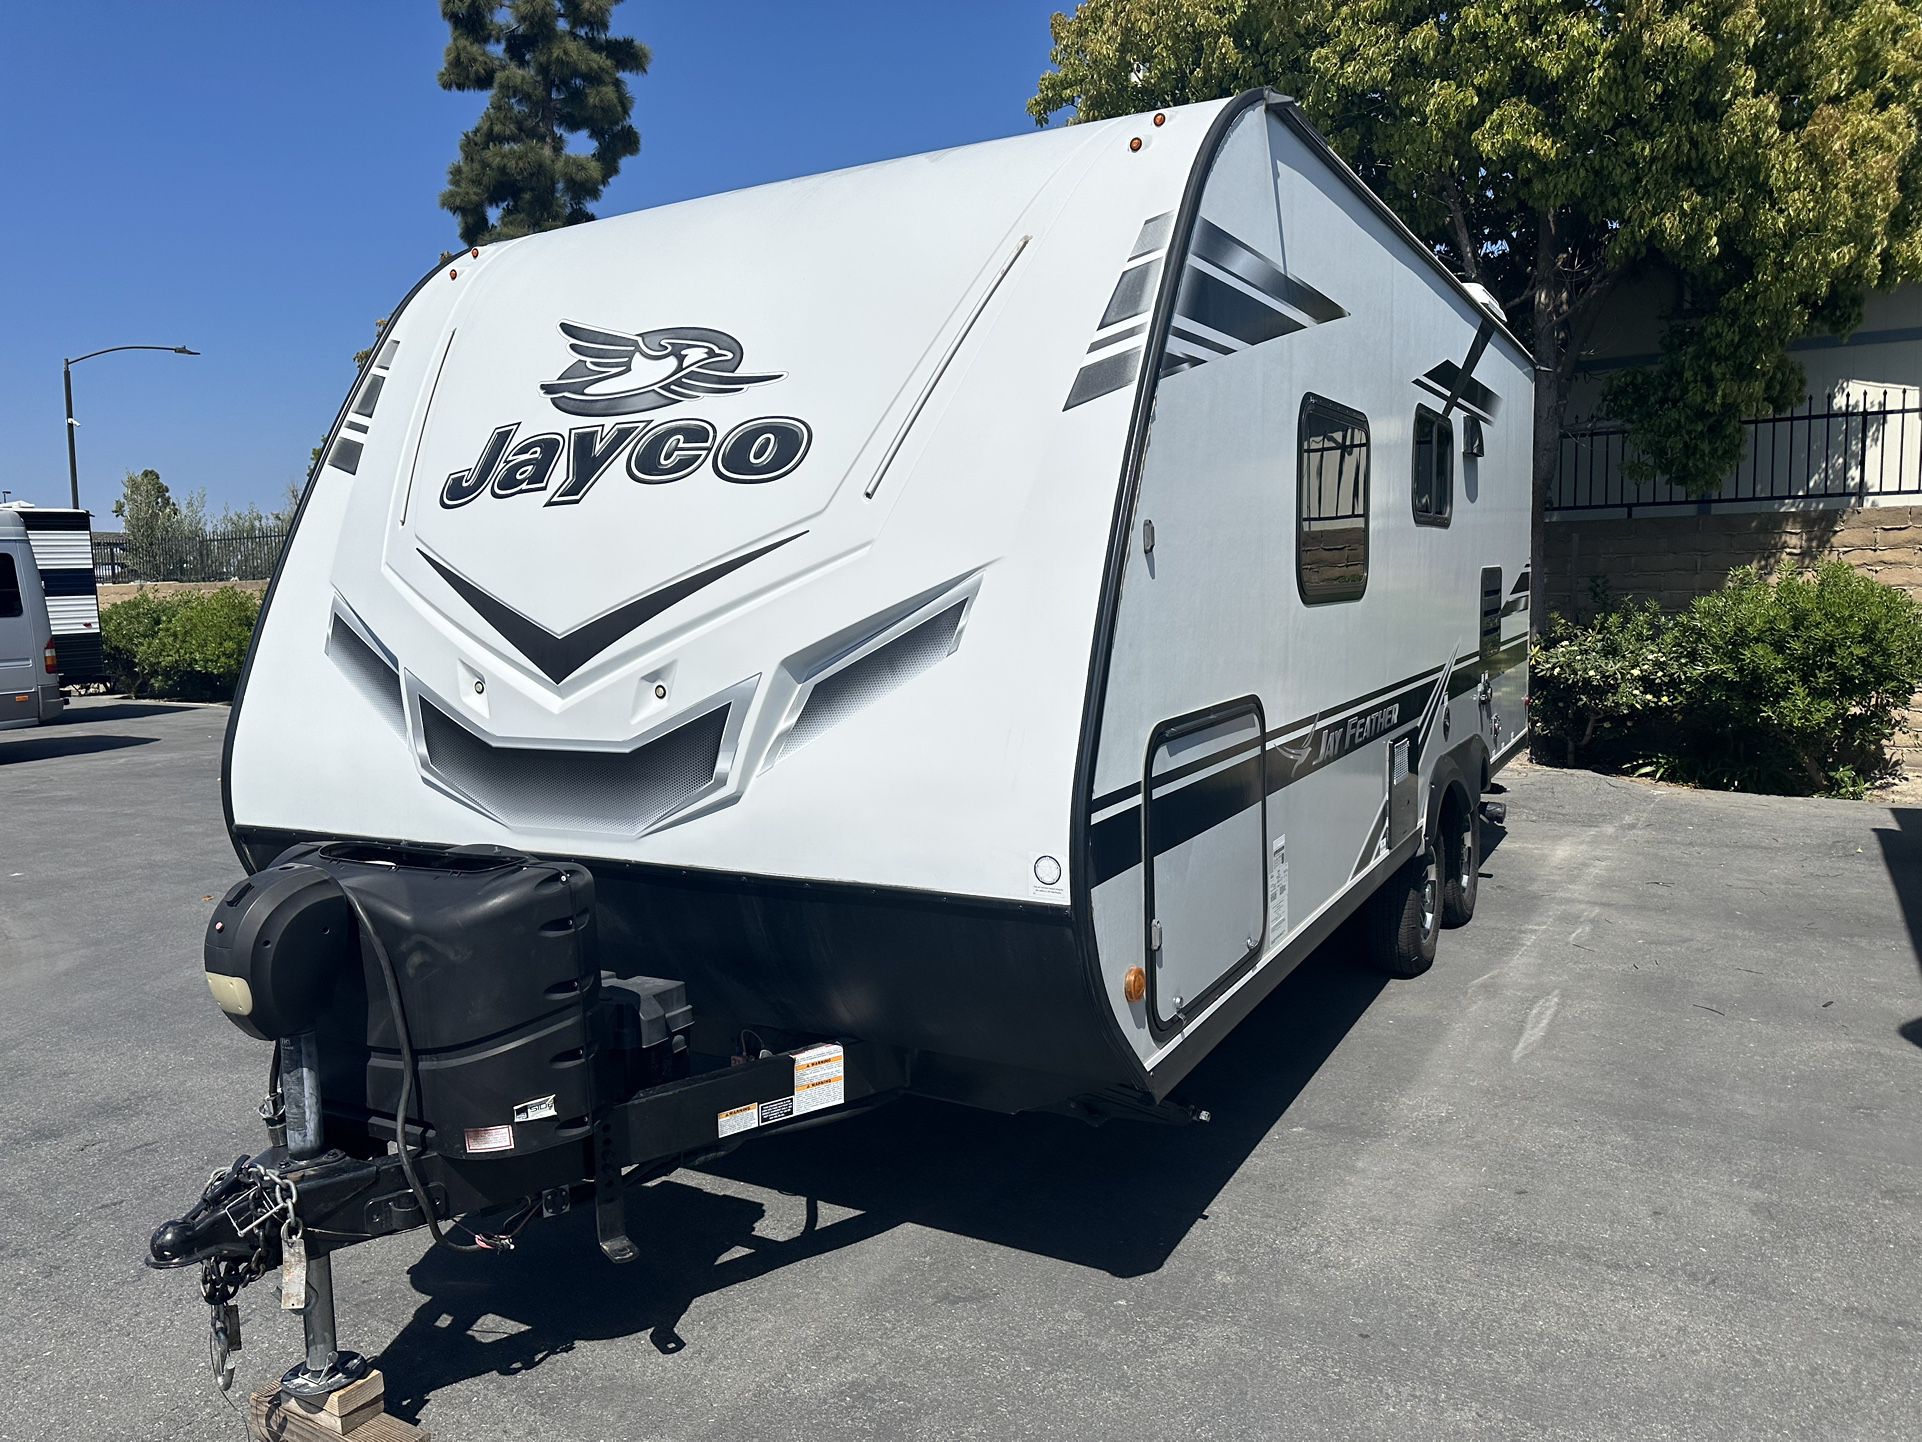 2020 Jayco Jay Feather 18 Ft. Travel Trailer